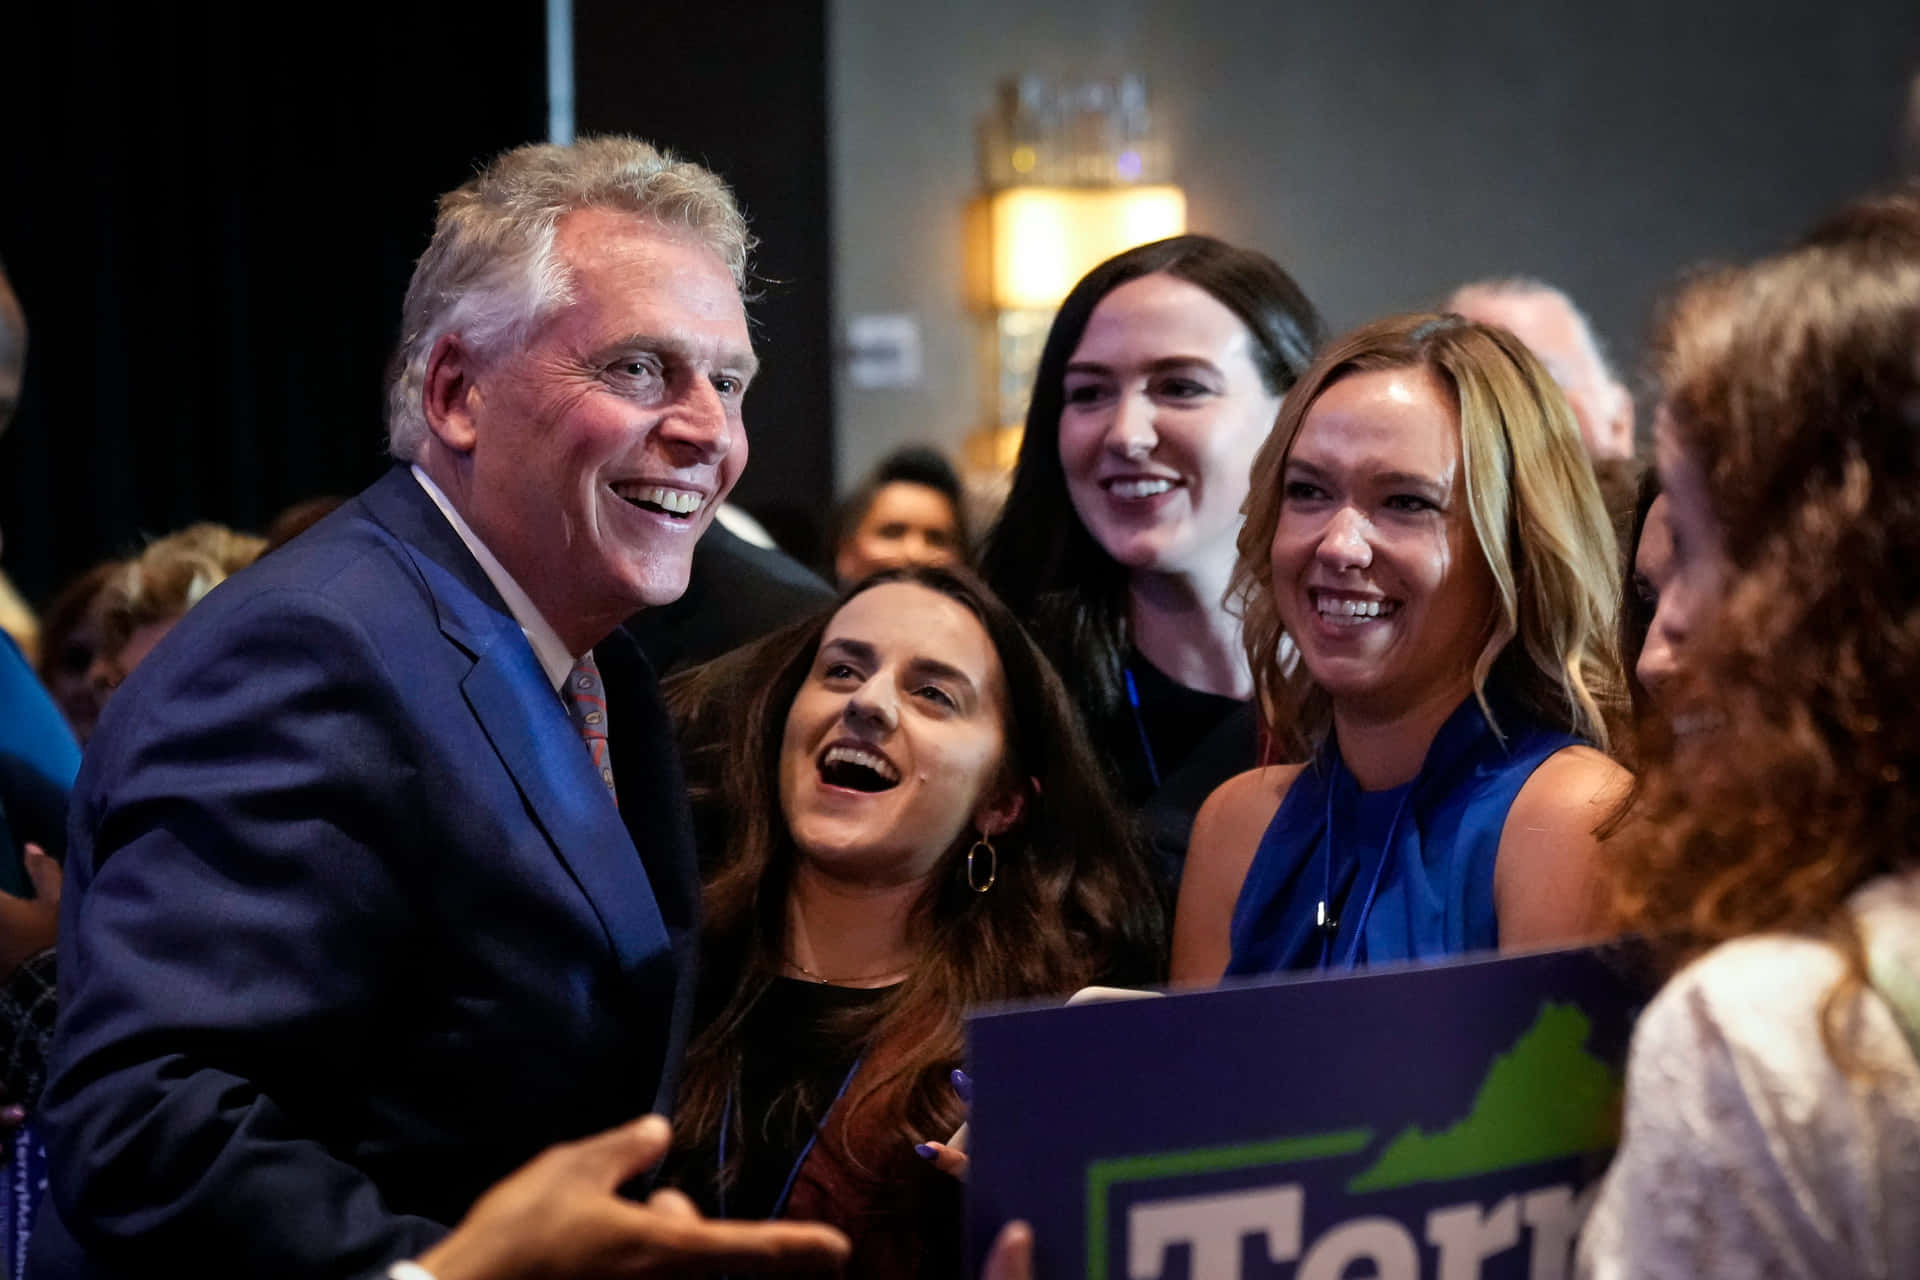 Terry Mcauliffe enthusiastically addressing his supporters. Wallpaper